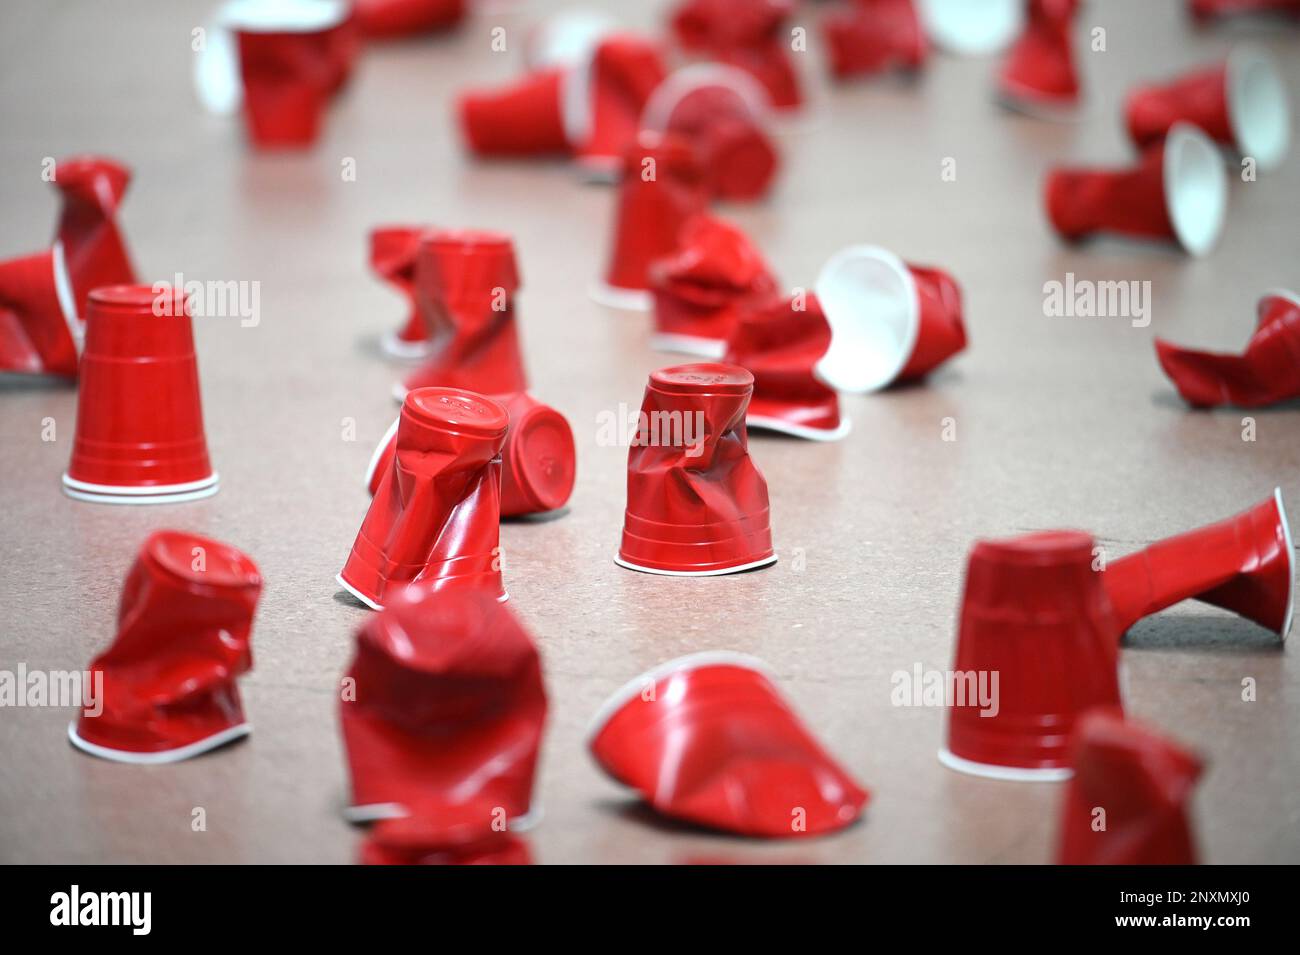 https://c8.alamy.com/comp/2NXMXJ0/new-york-usa-01st-mar-2023-view-of-red-solo-cups-cast-sculptures-by-artist-paula-crown-in-an-installation-titled-solotogether-new-york-ny-march-1-2023-a-two-part-art-installation-solotogether-by-the-artist-with-a-large-bronze-sculpture-on-the-plaza-and-a-lower-level-exhibition-of-cast-sculptures-of-solo-cups-as-well-as-framed-pictures-and-an-audio-experience-will-be-on-display-through-may-21st-photo-by-anthony-beharsipa-usa-credit-sipa-usaalamy-live-news-2NXMXJ0.jpg